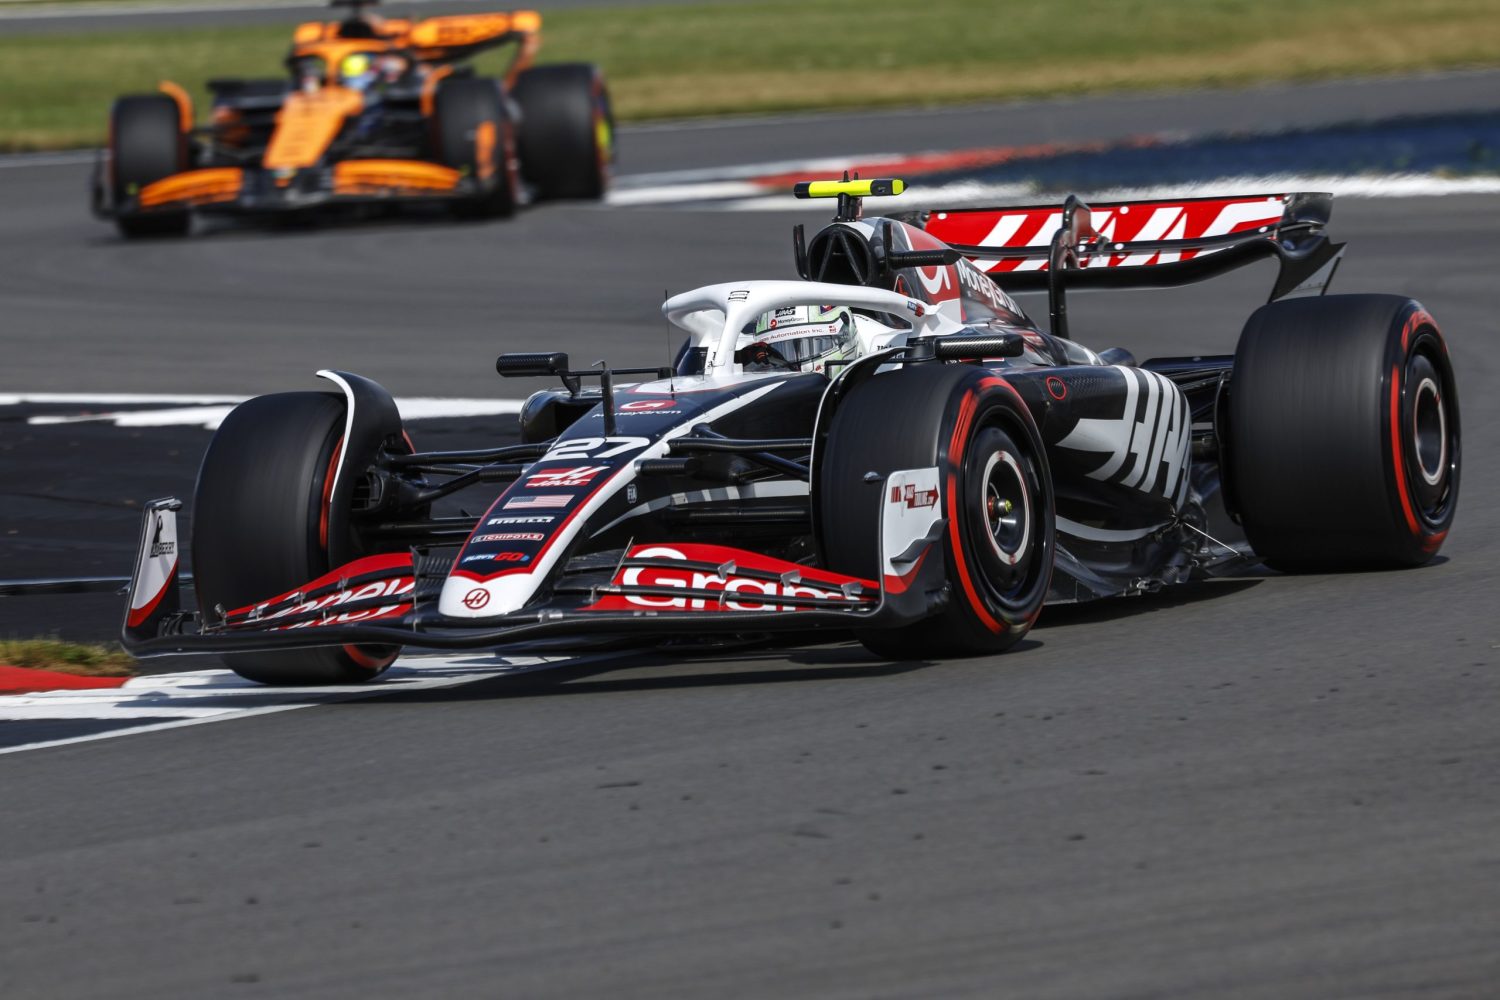 Hulkenberg wants points at Silverstone with Haas after strong Q3